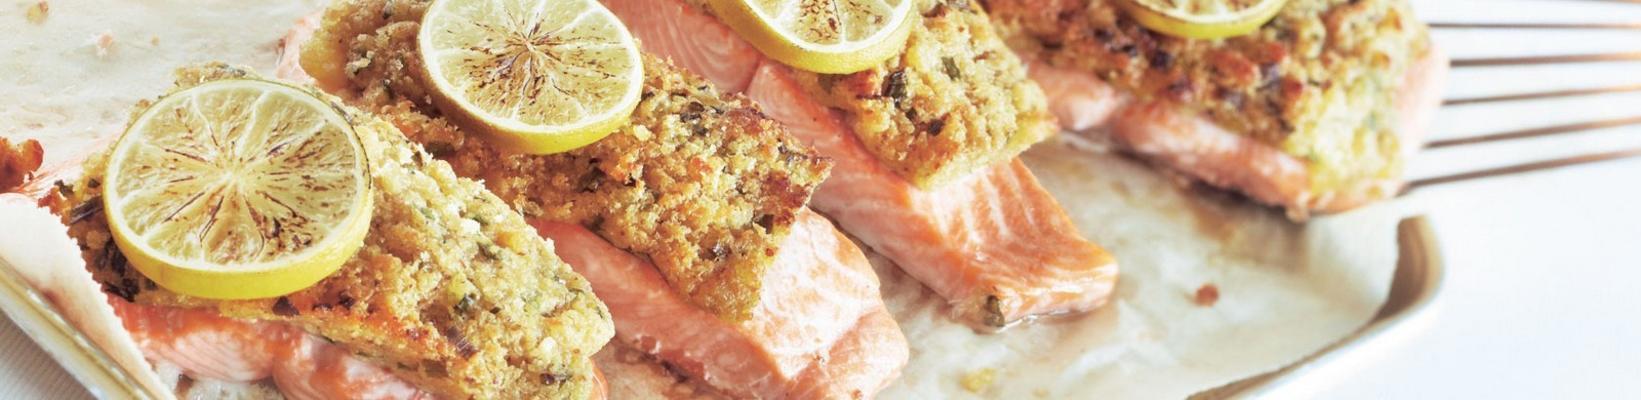 salmon with chive mustard panade